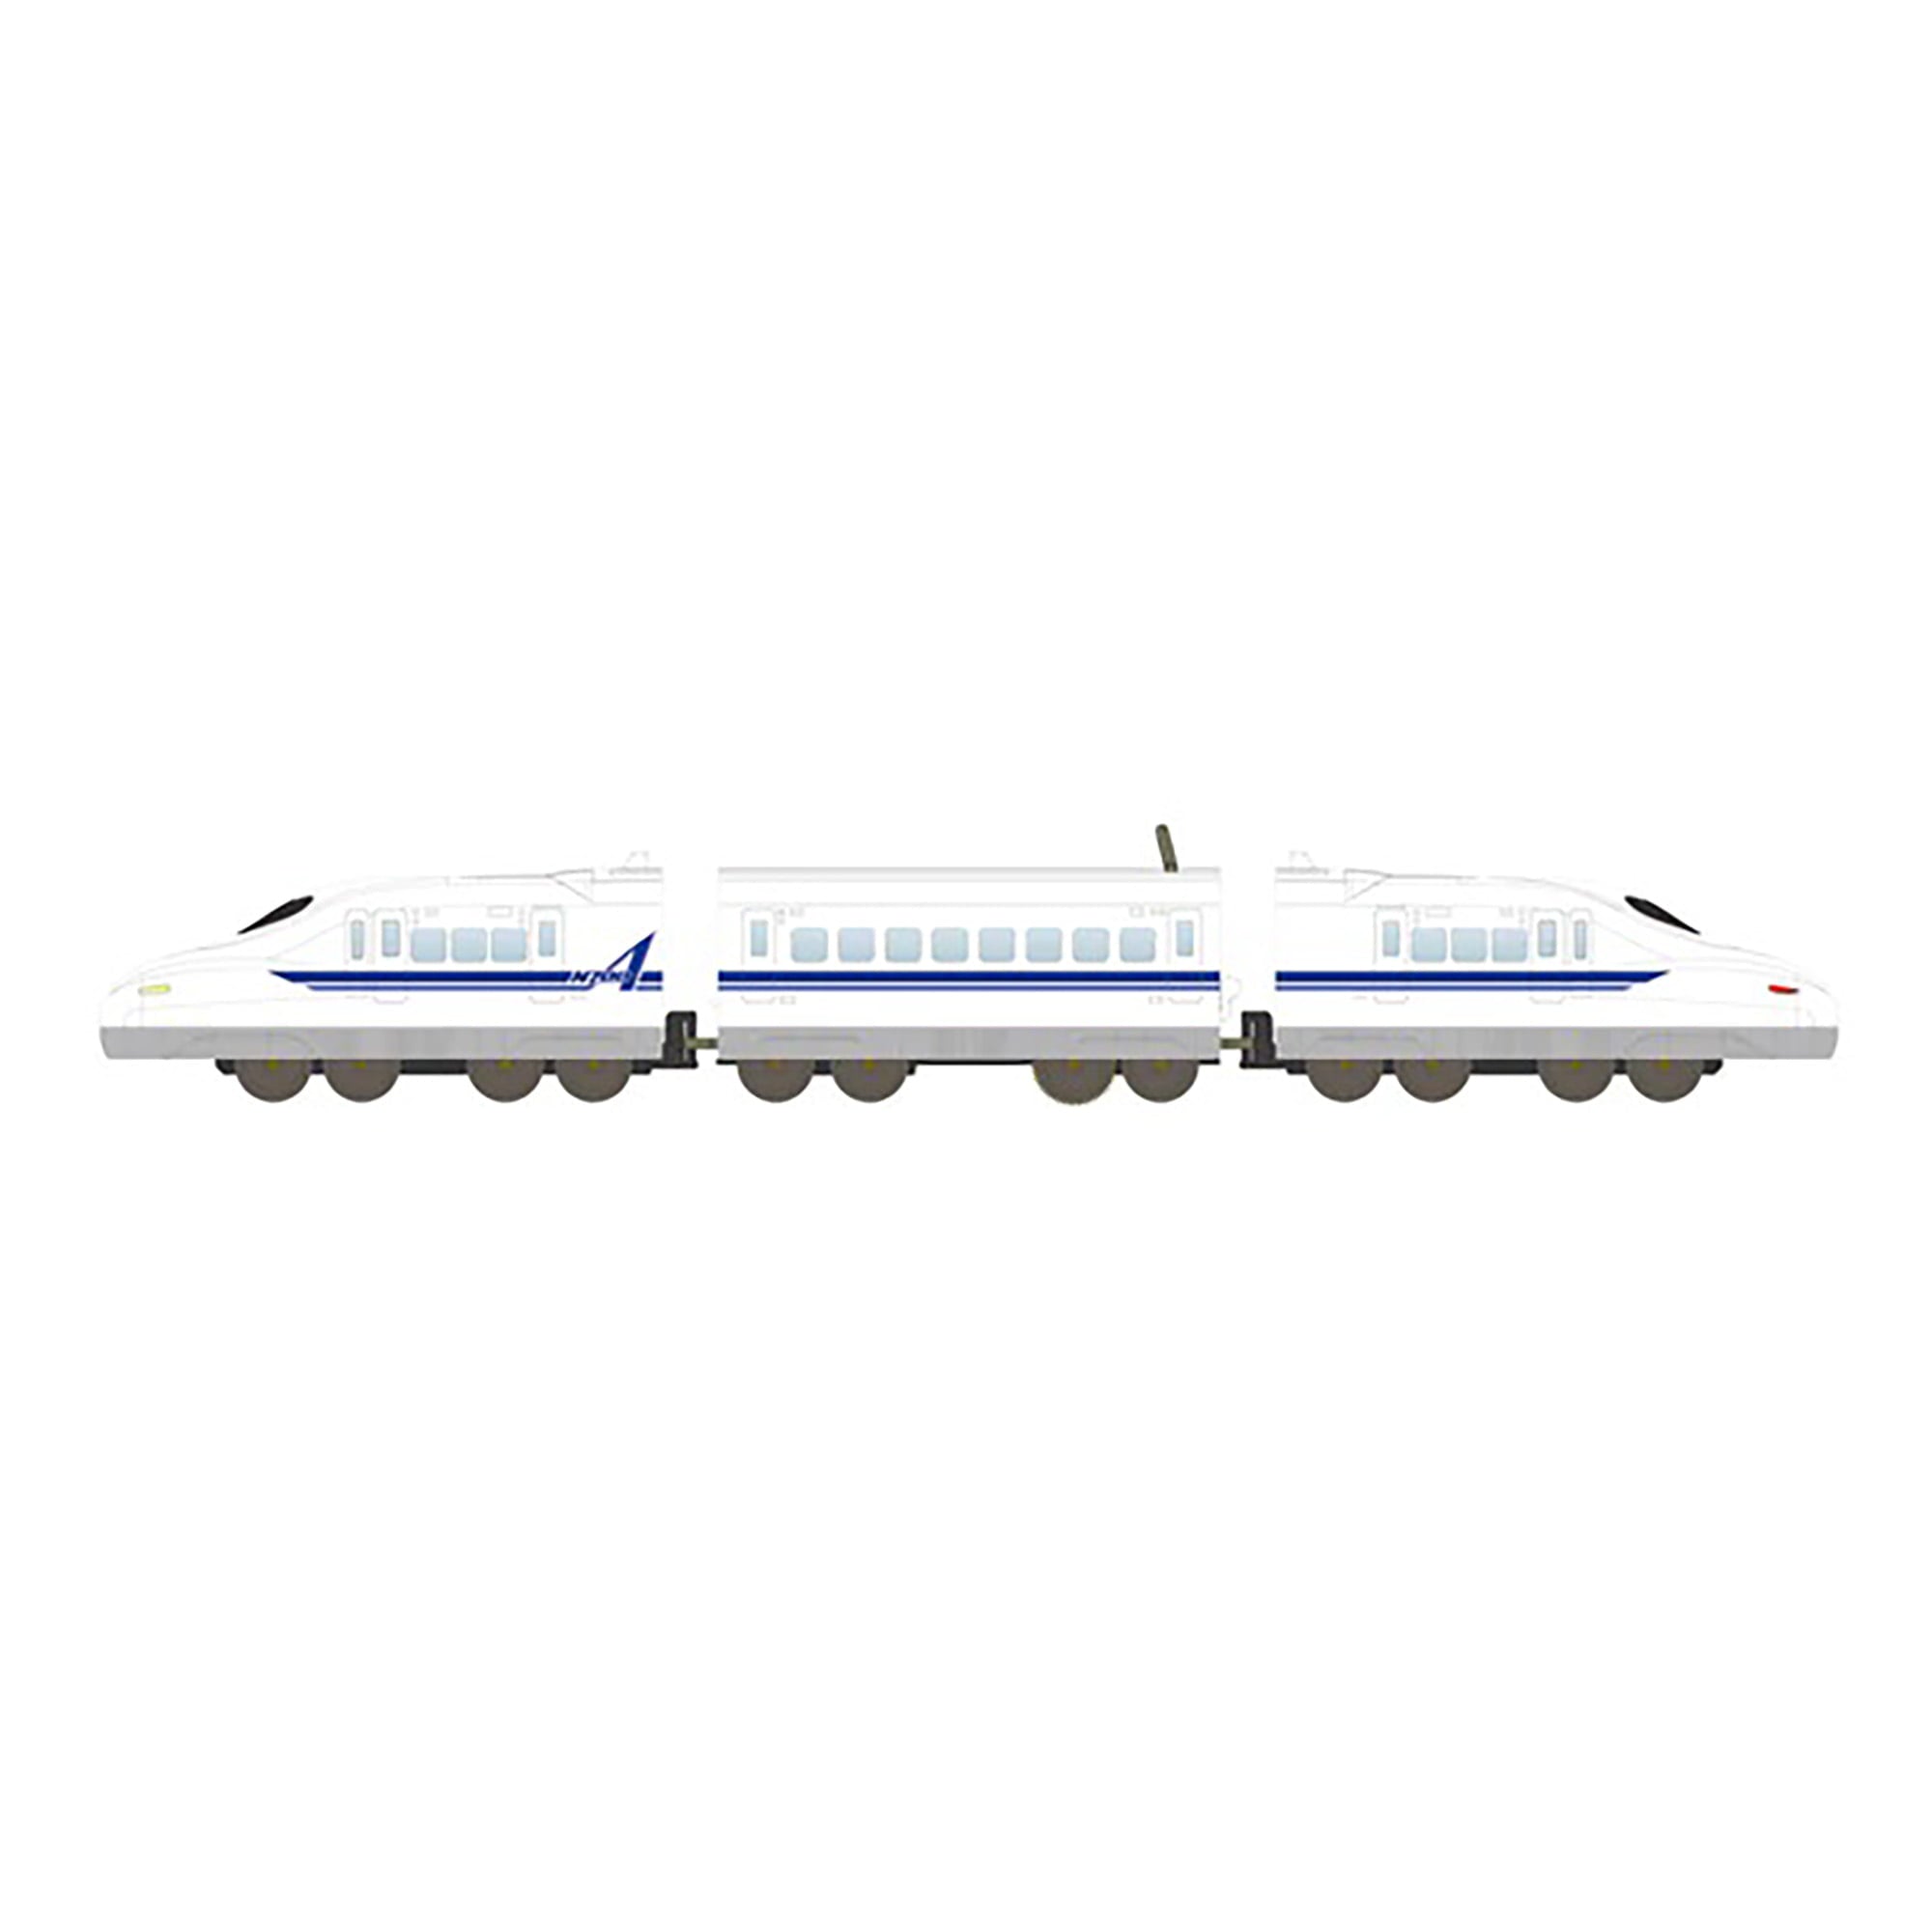 World Train Series: Collector's Edition Japanese Bullet Train - Shinkansen N700A - Battery Operated Train Set, Ages 3+